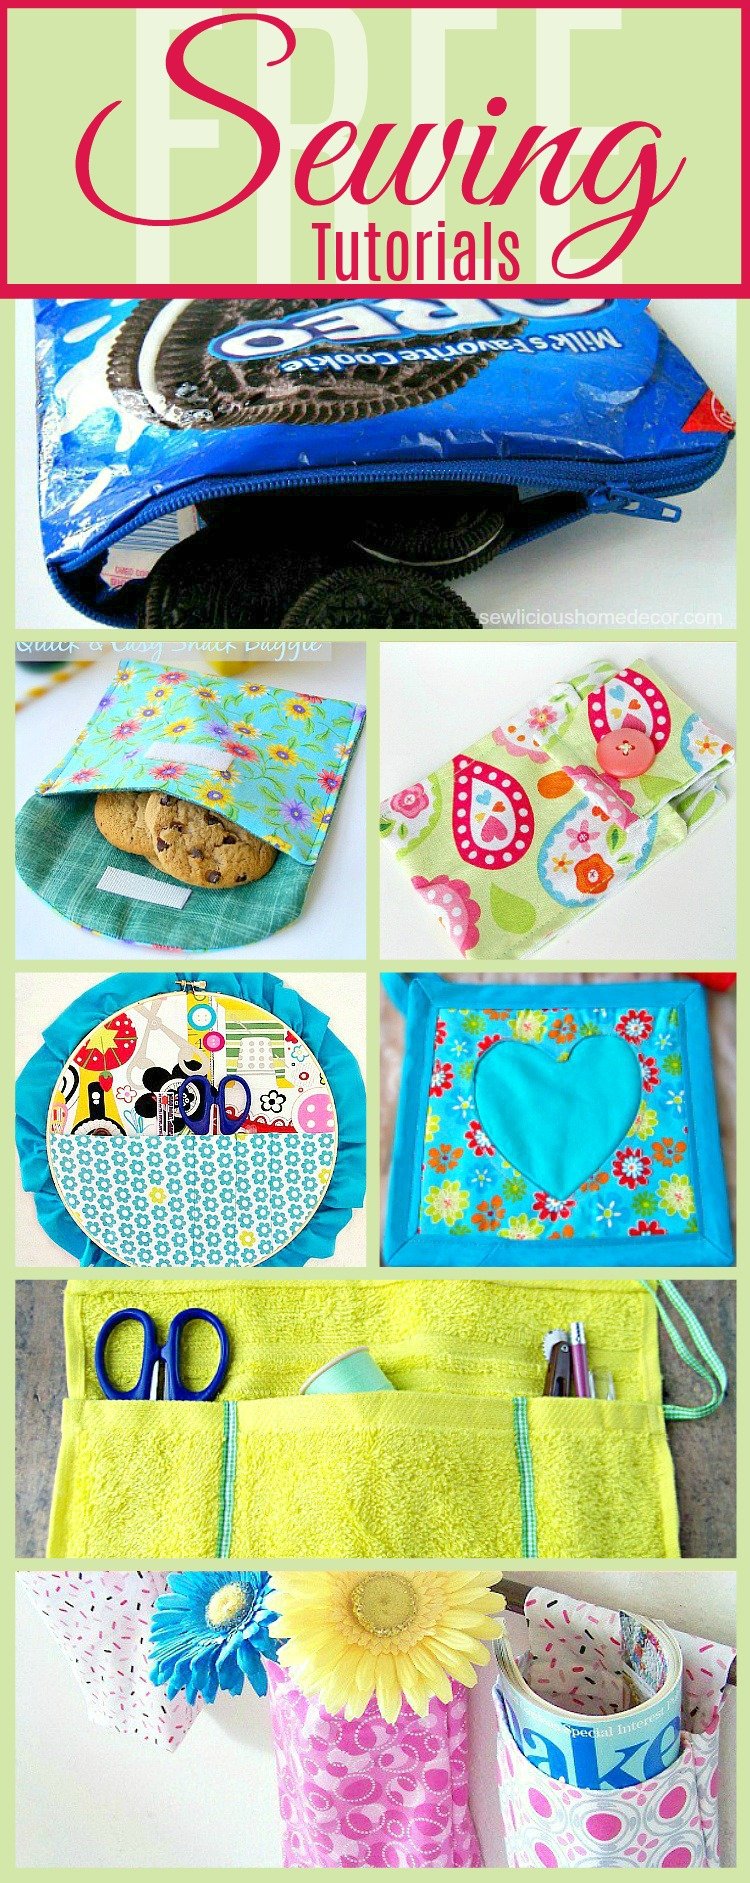 Over 25 Easy Sewing Projects for Beginners or Advanced Sewers